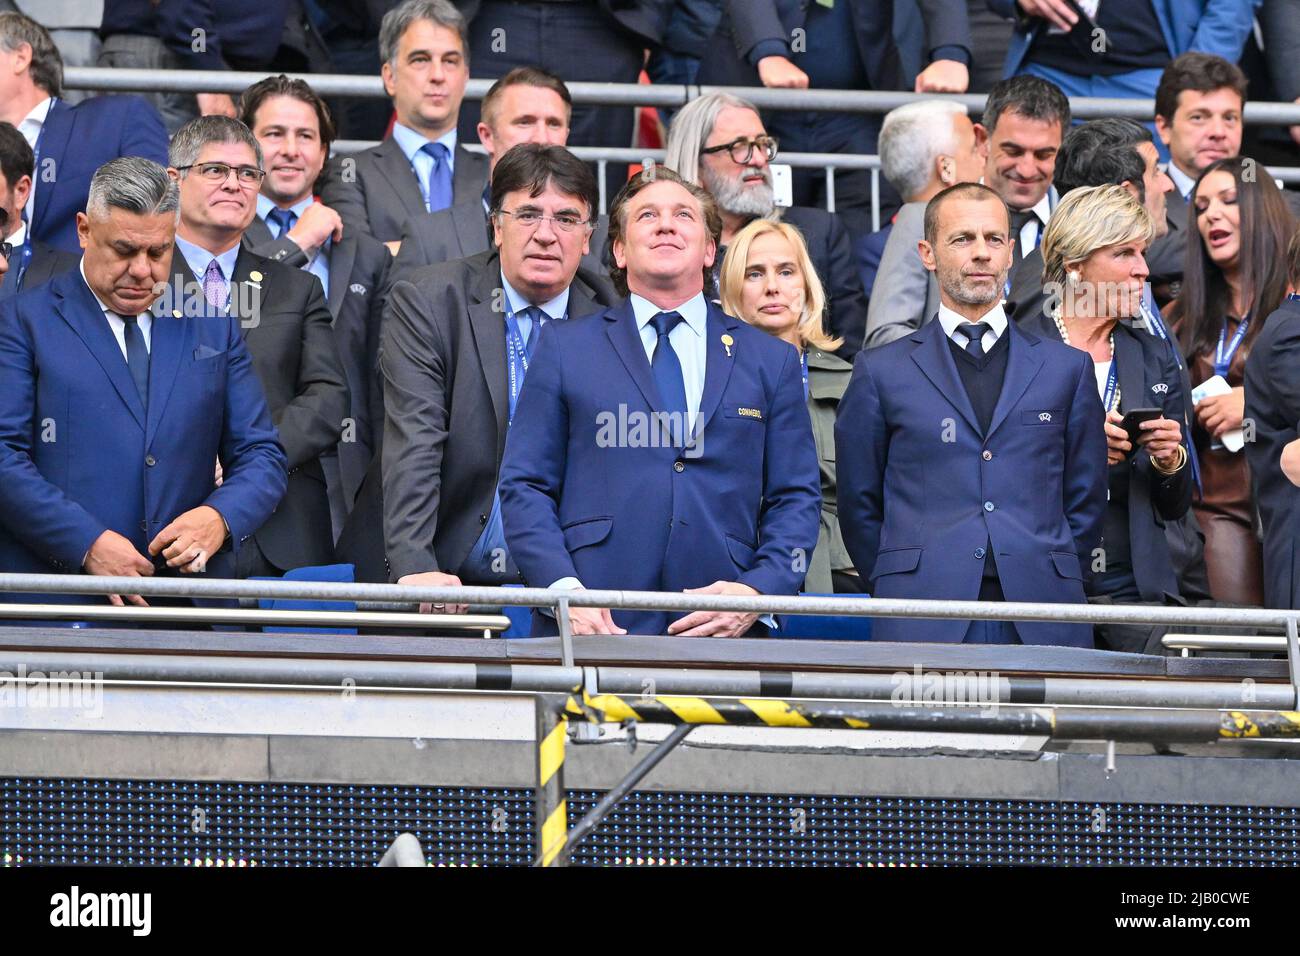 London, UK. 31st May, 2022. Mr.Alejandro DOminguez Pres. Conmebol, and Alexander Ceferin Pre. Uefa during the UEFA CONMEBOL Finalissima 2022 between Italy and Argentina at Wembley Stadium in London, England. Cristiano Mazzi/SPP Credit: SPP Sport Press Photo. /Alamy Live News Stock Photo